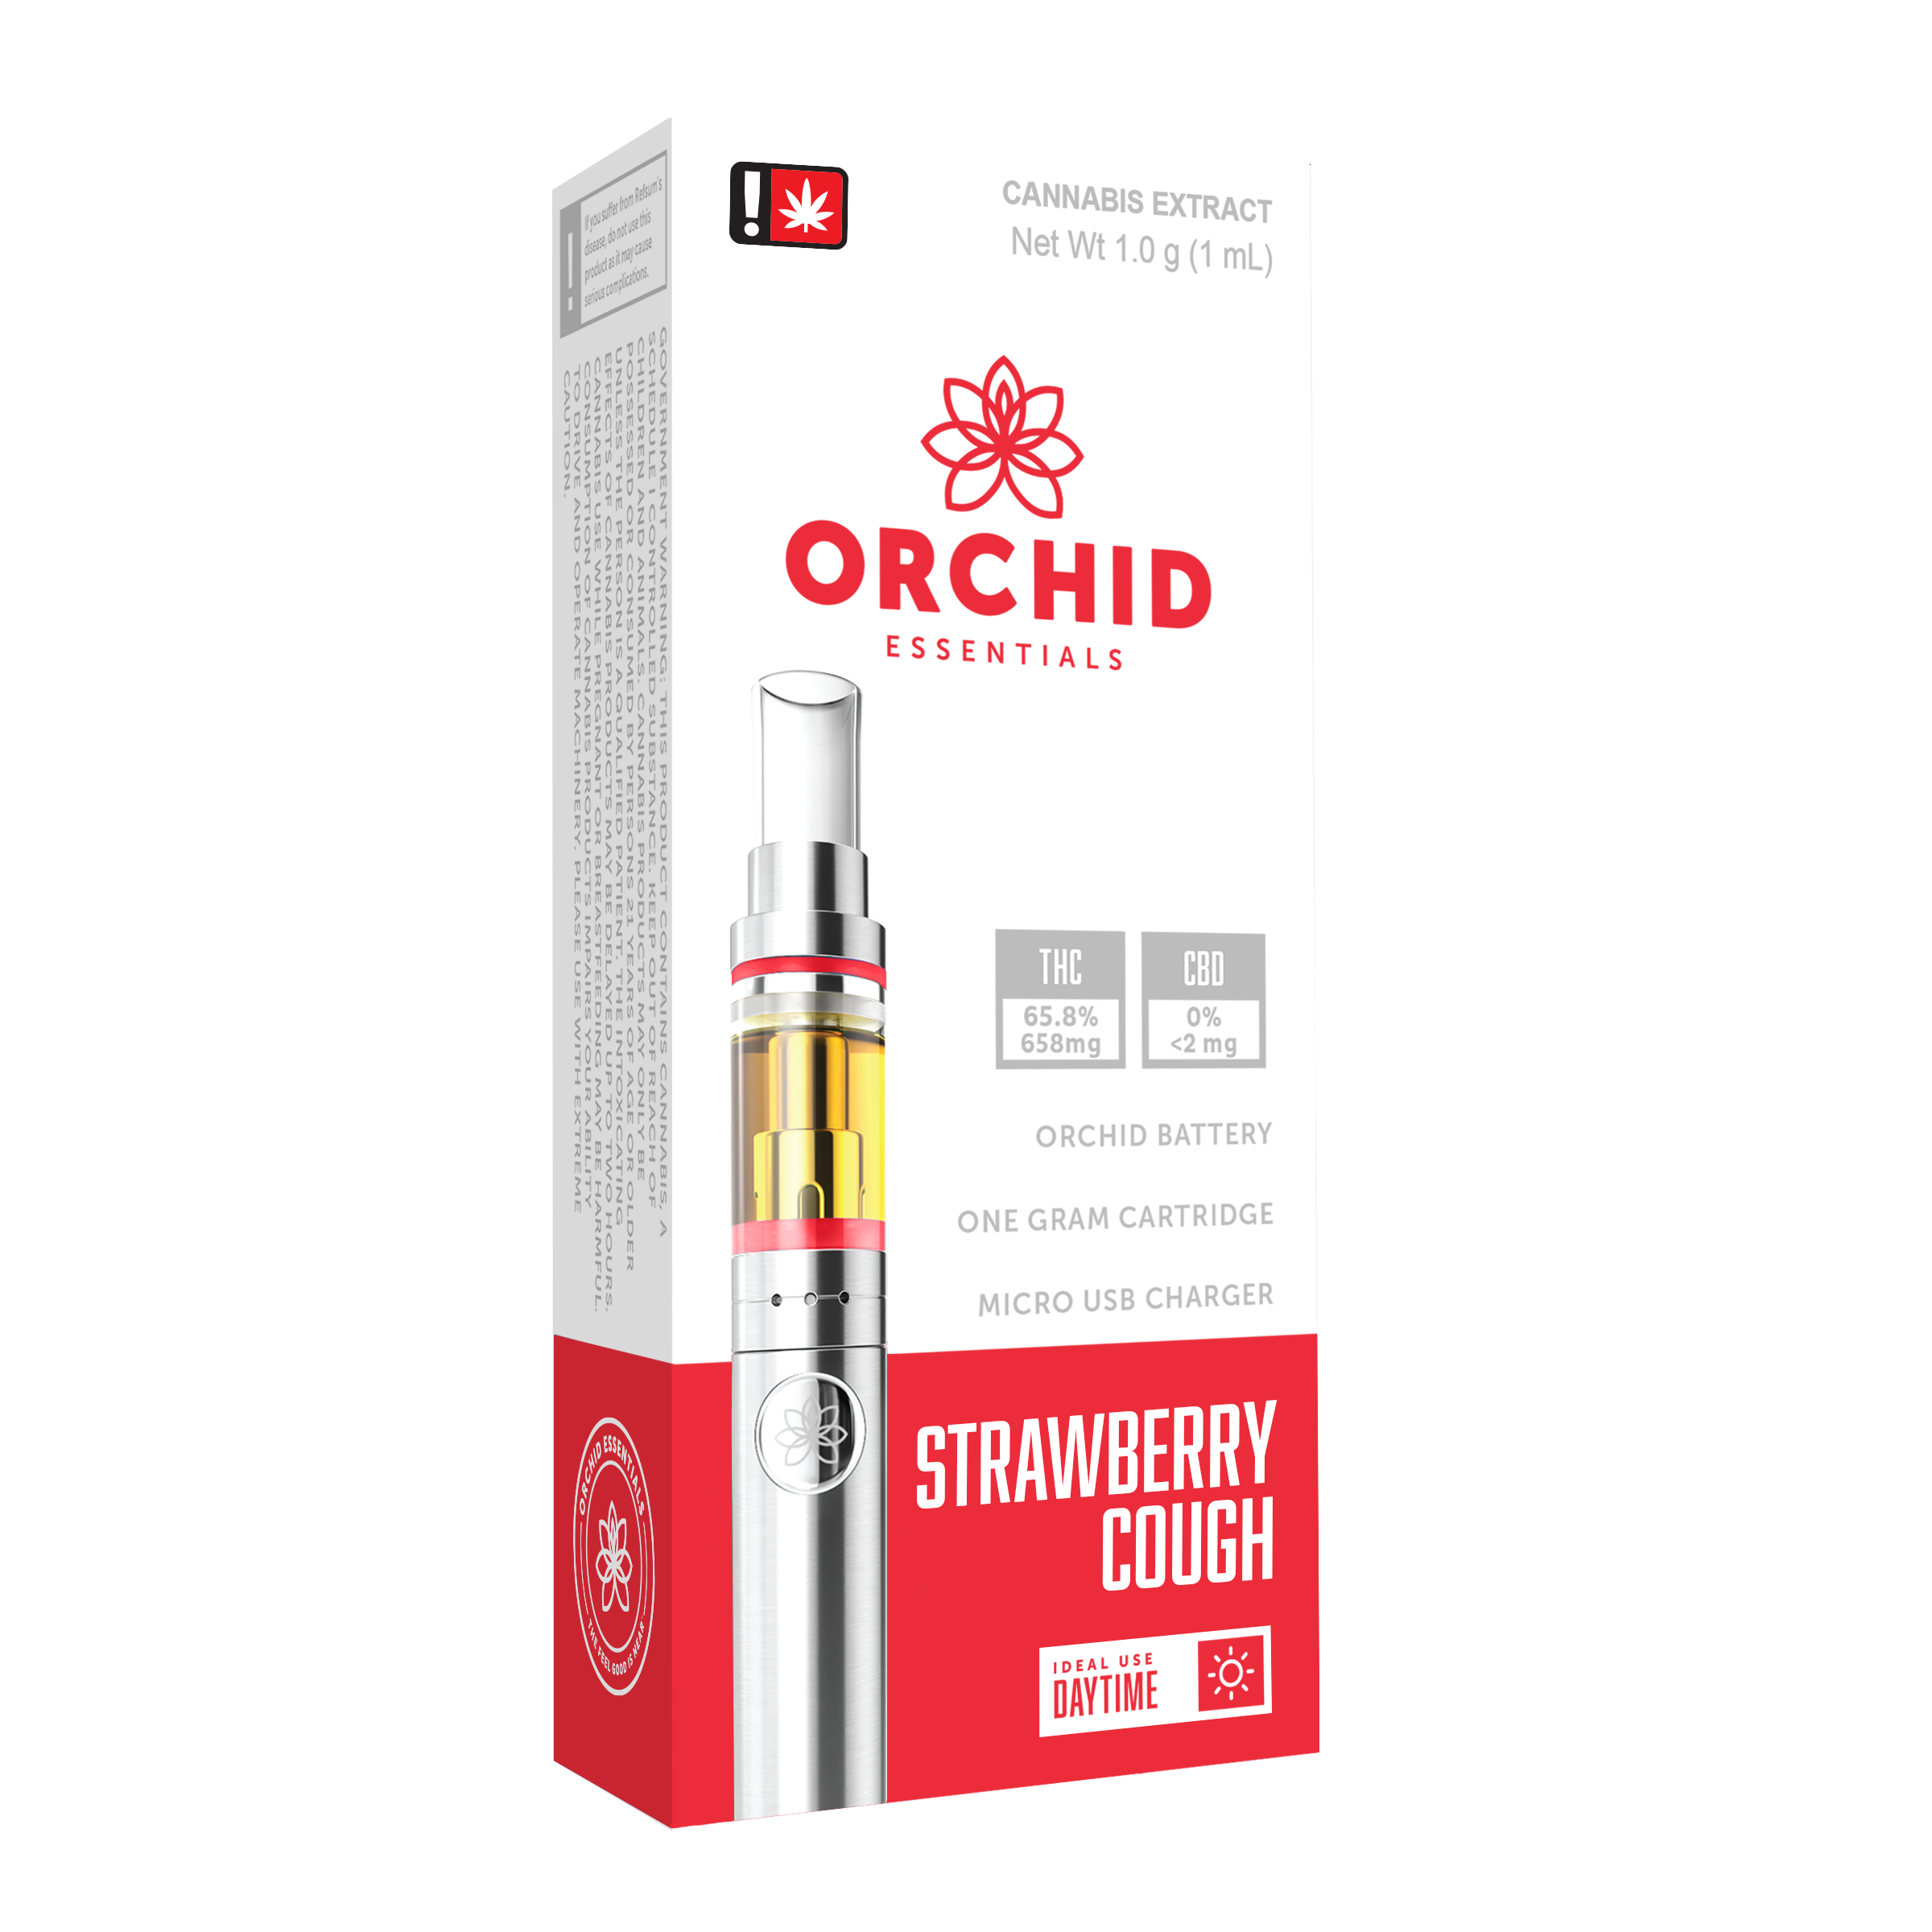 Strawberry Cough exotic vape for sale-Buy exotic vapes online